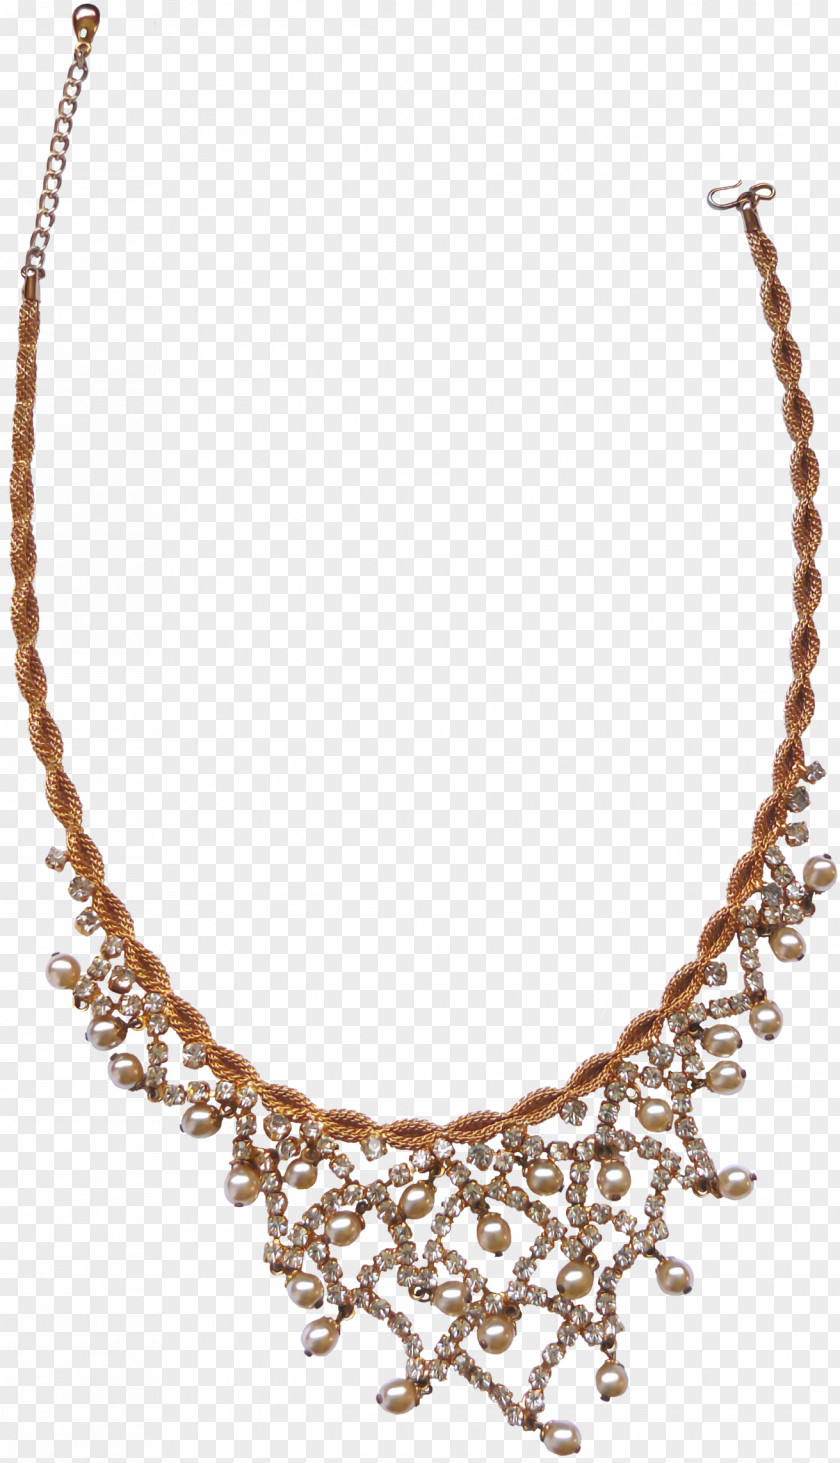 Necklace Images Jewellery Image Clip Art PNG